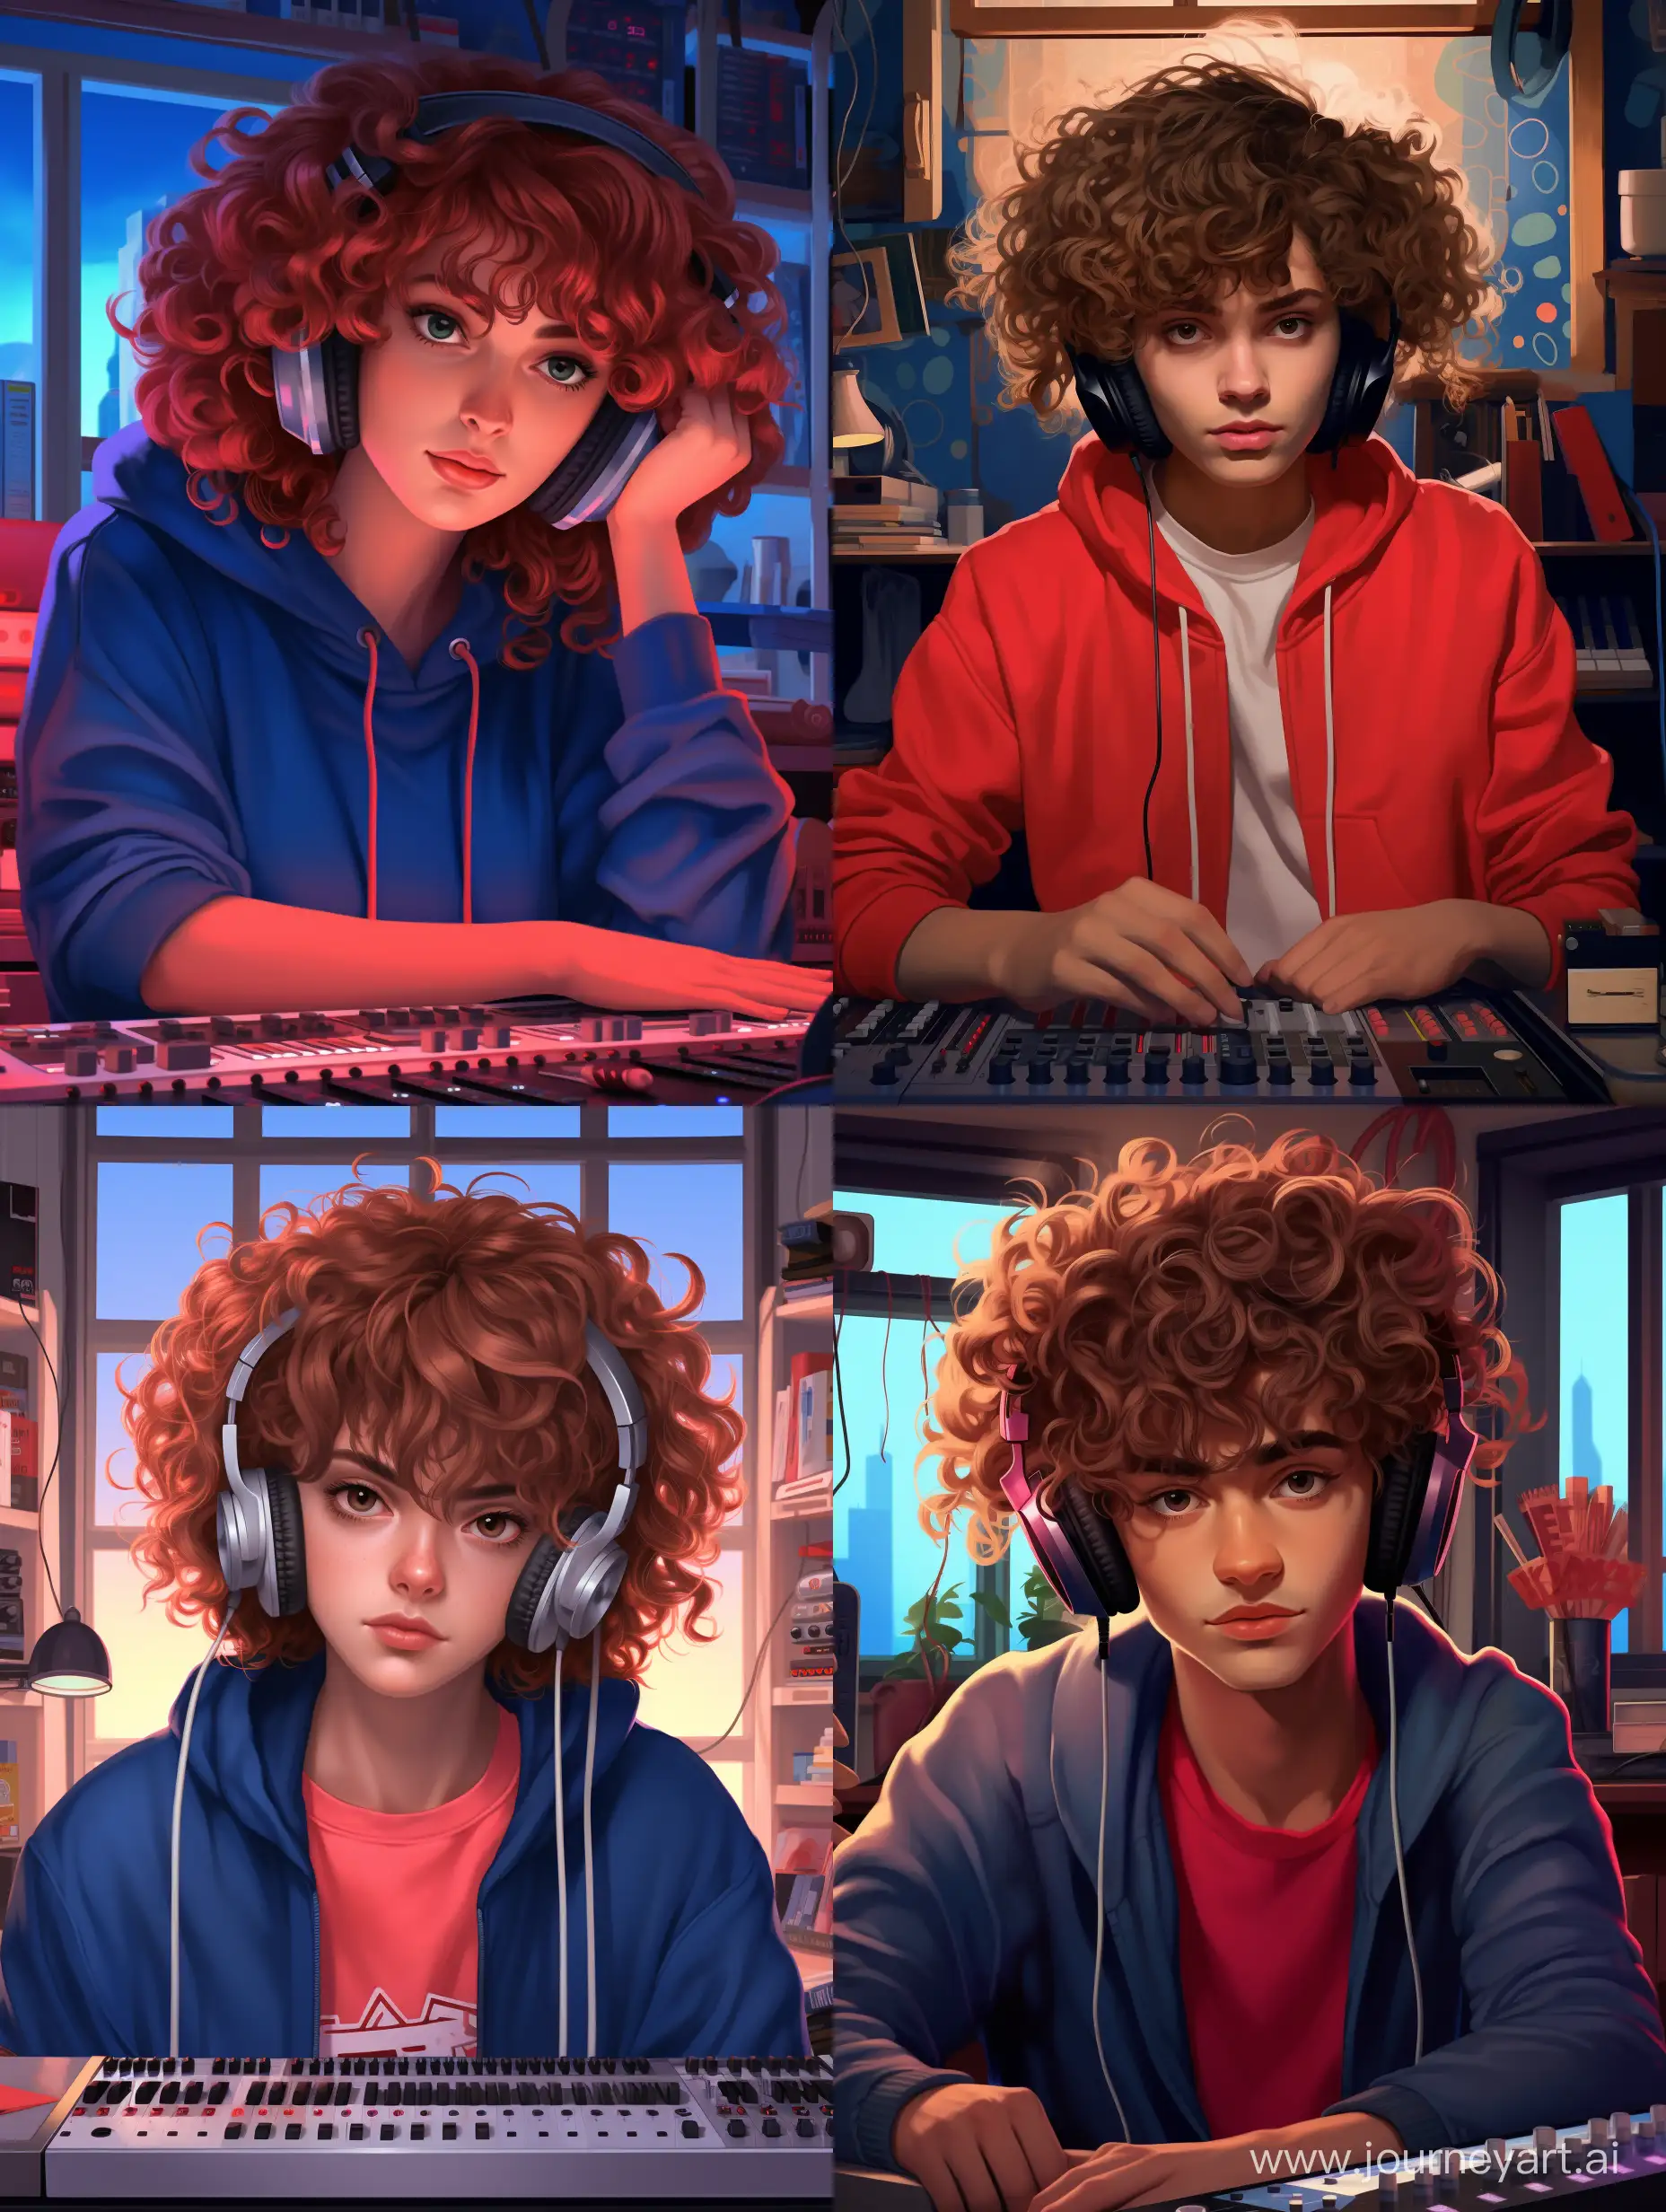 Talented-CurlyHaired-Beatmaker-in-Vibrant-Red-Sweatshirt-Mixing-Beats-at-BlueEyed-Console